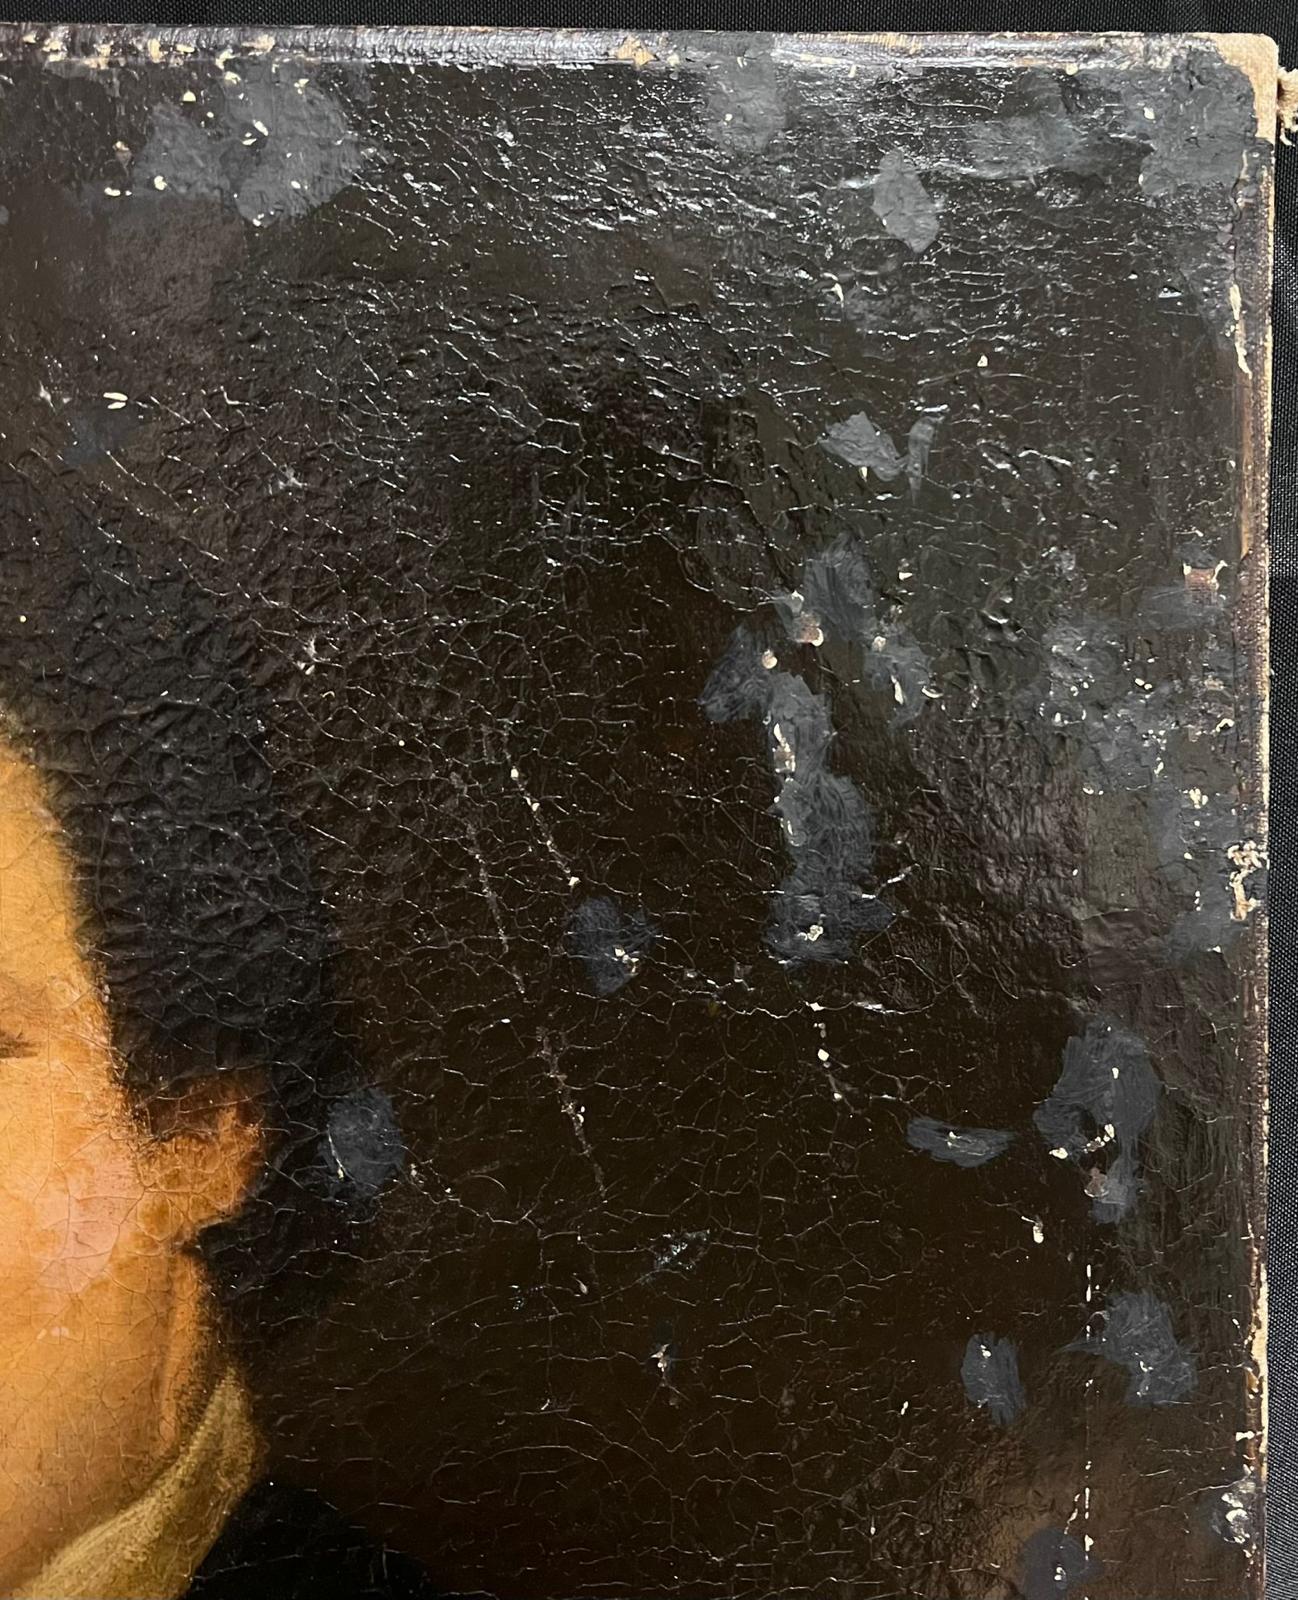 18th Century French Portrait of Mysterious Man Oil on Canvas for restoration - Black Portrait Painting by French School